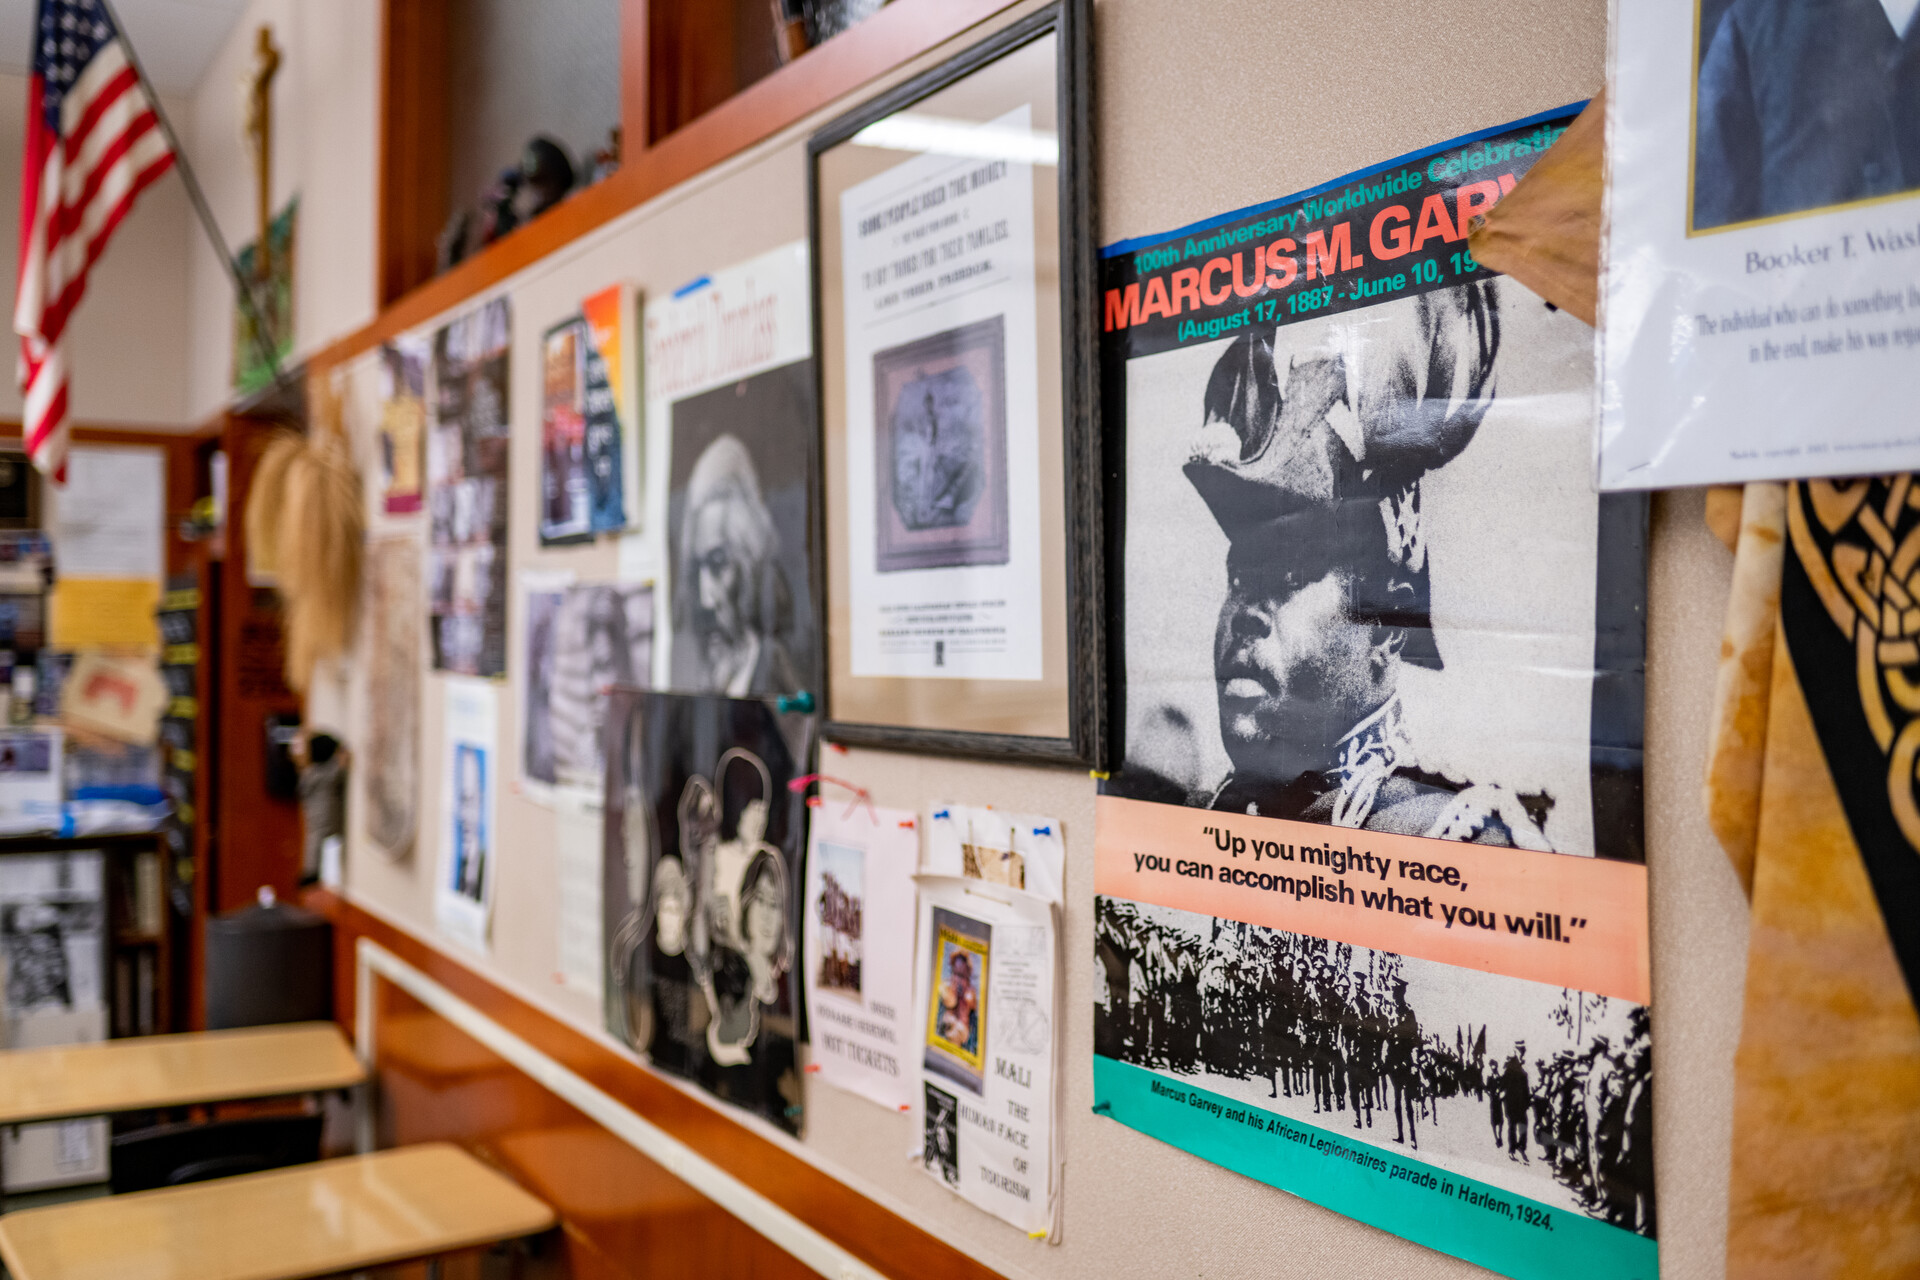 Dozens of black and white as well as colorful posters depict Black historical figures with inspirational quotes. These line the wall of a classroom where desks are neatly in rows.